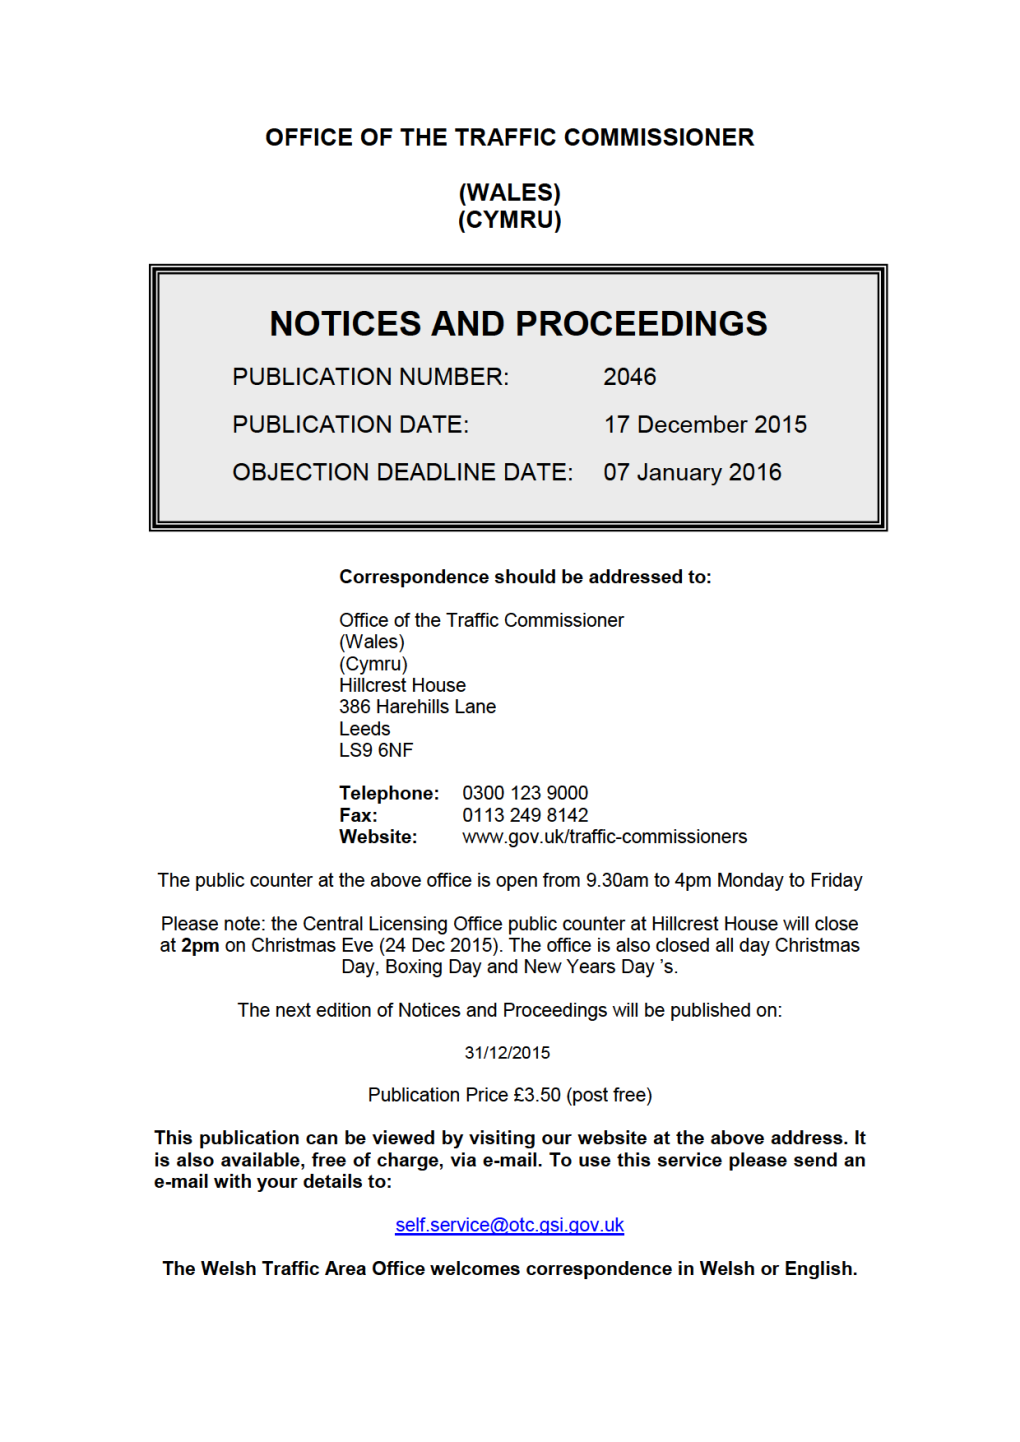 NOTICES and PROCEEDINGS 17 December 2015